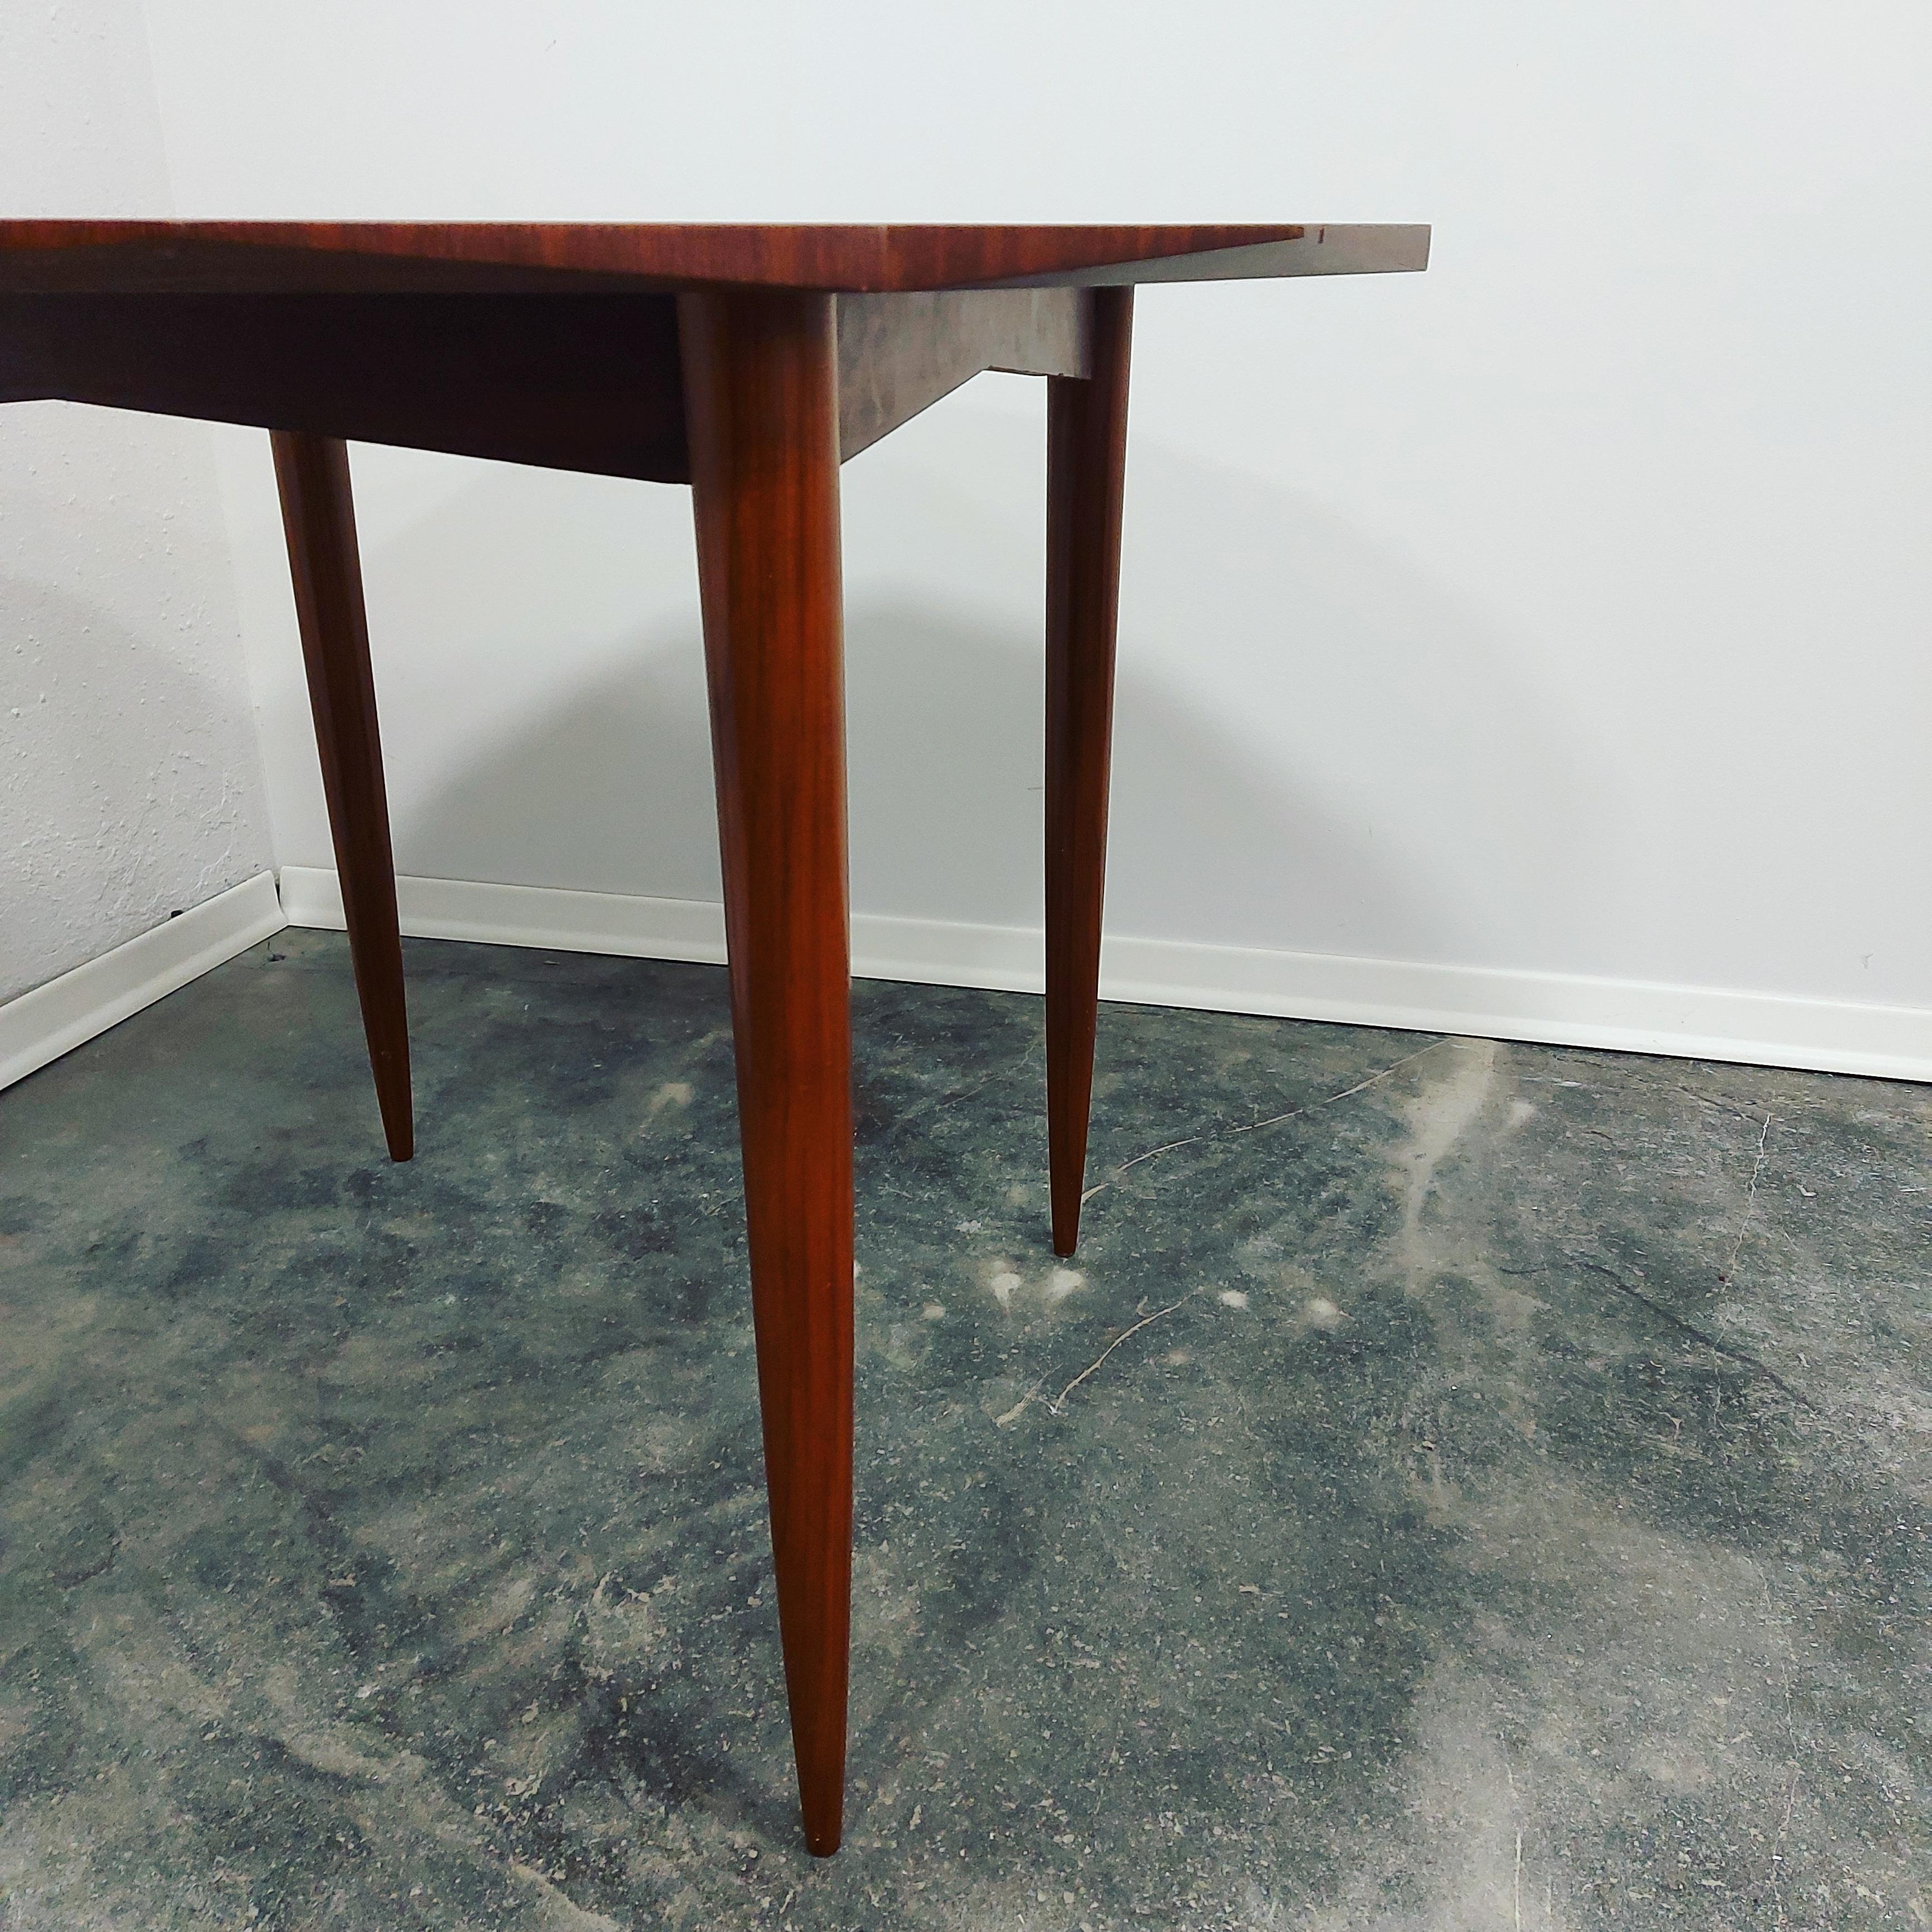 Very nice dining table in Scandinavian style.

The edges of the table are processed into different surfaces (shapes of gemstone) and represent the central piece.

The legs of the table are designed and made to act as if the table is floating, but it